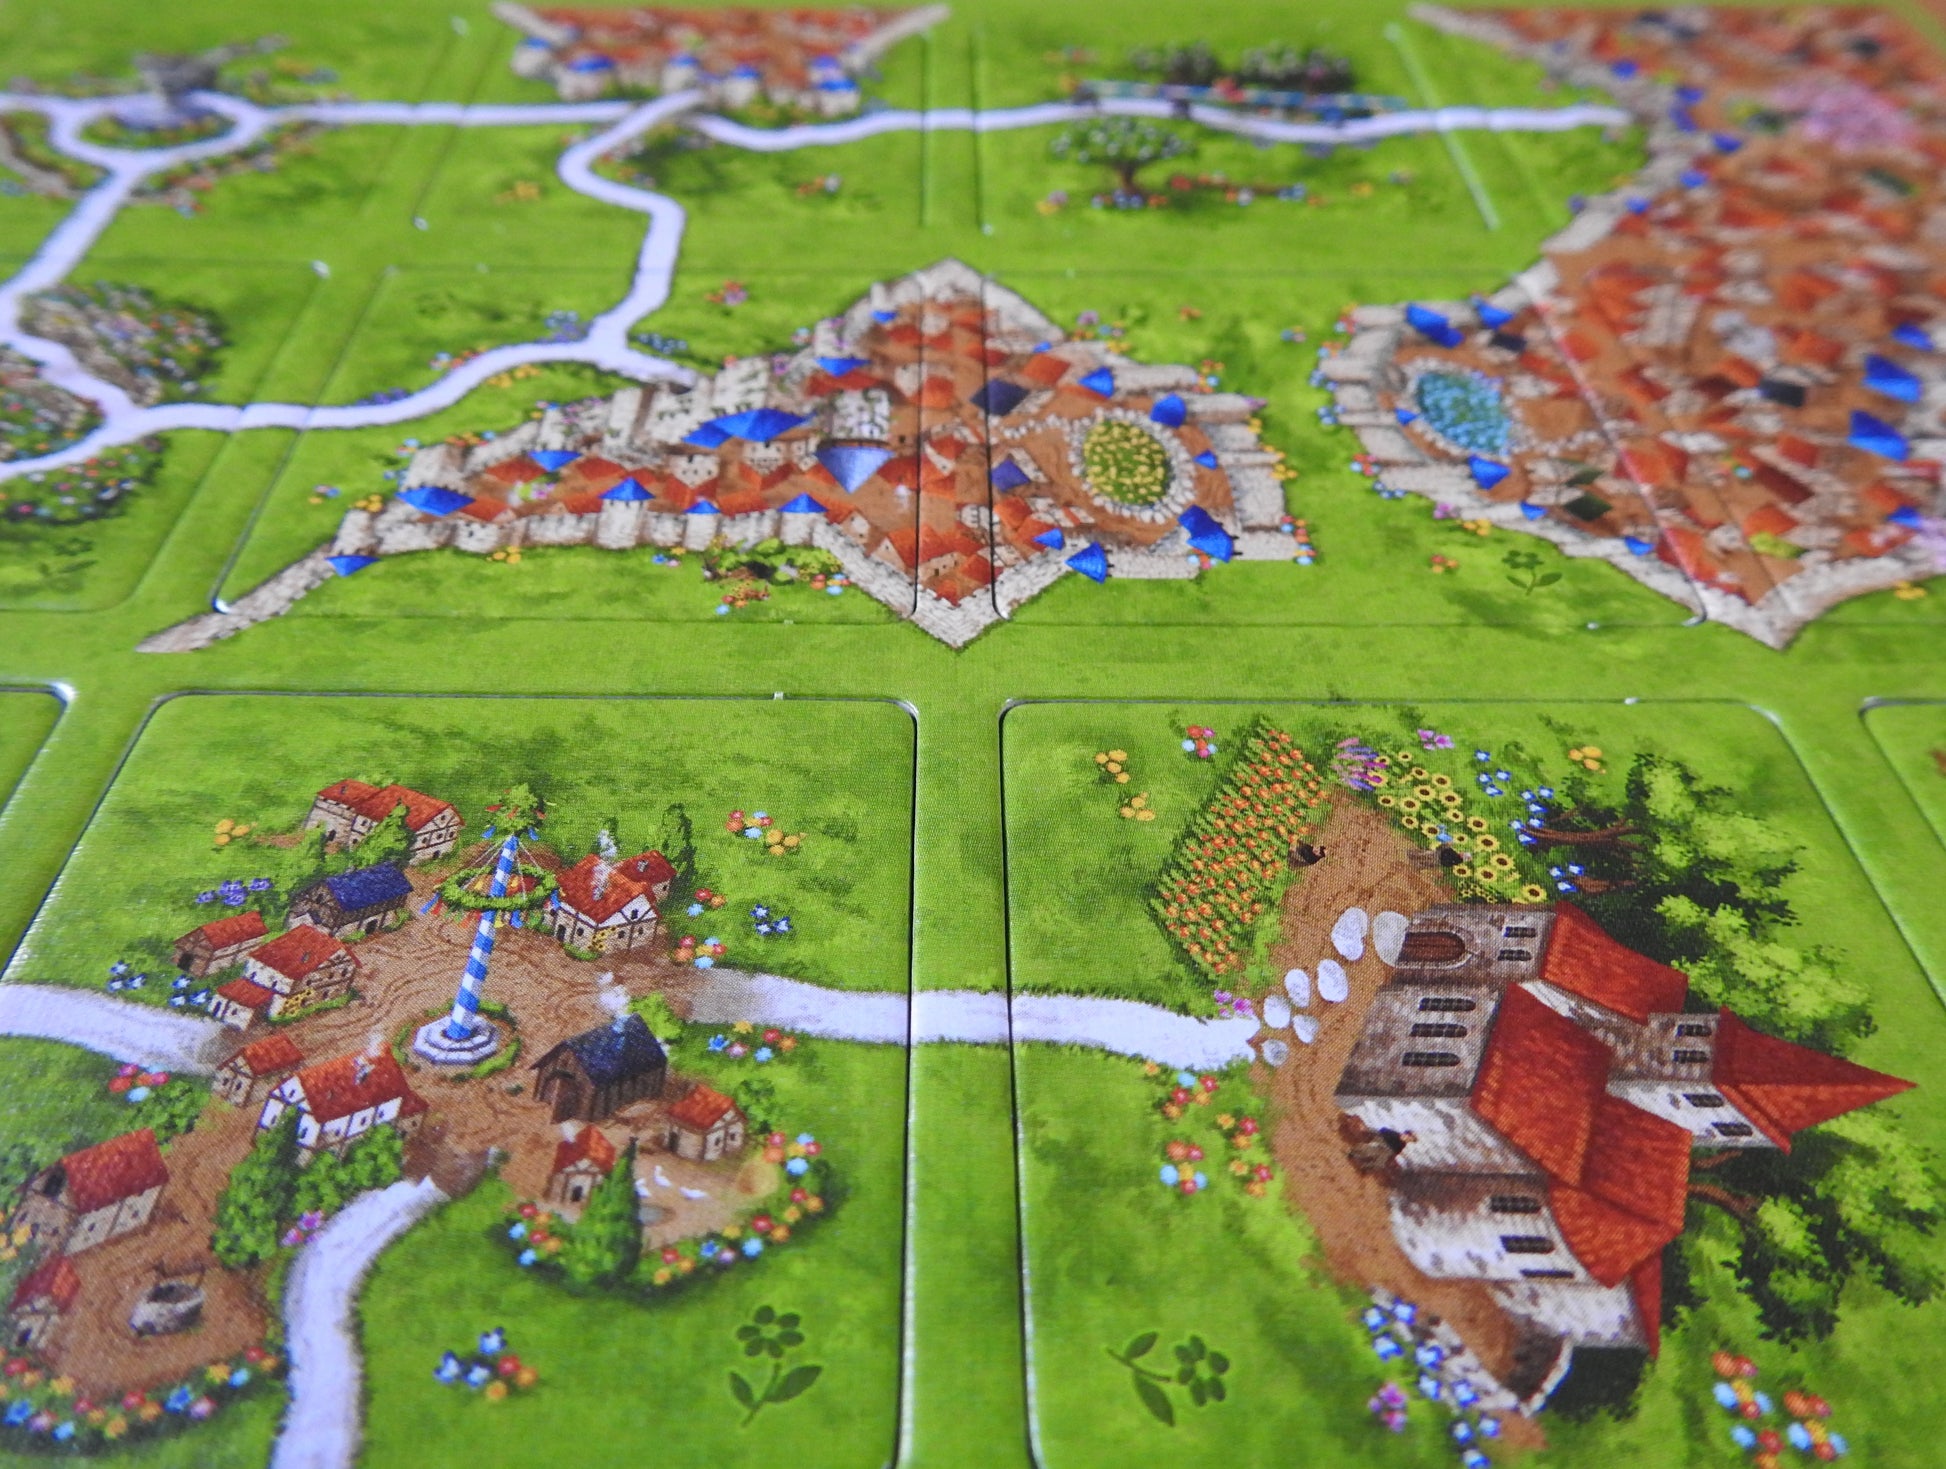 View of more tiles featuring beautiful illustrations in this Spring mini expansion for Carcassonne.